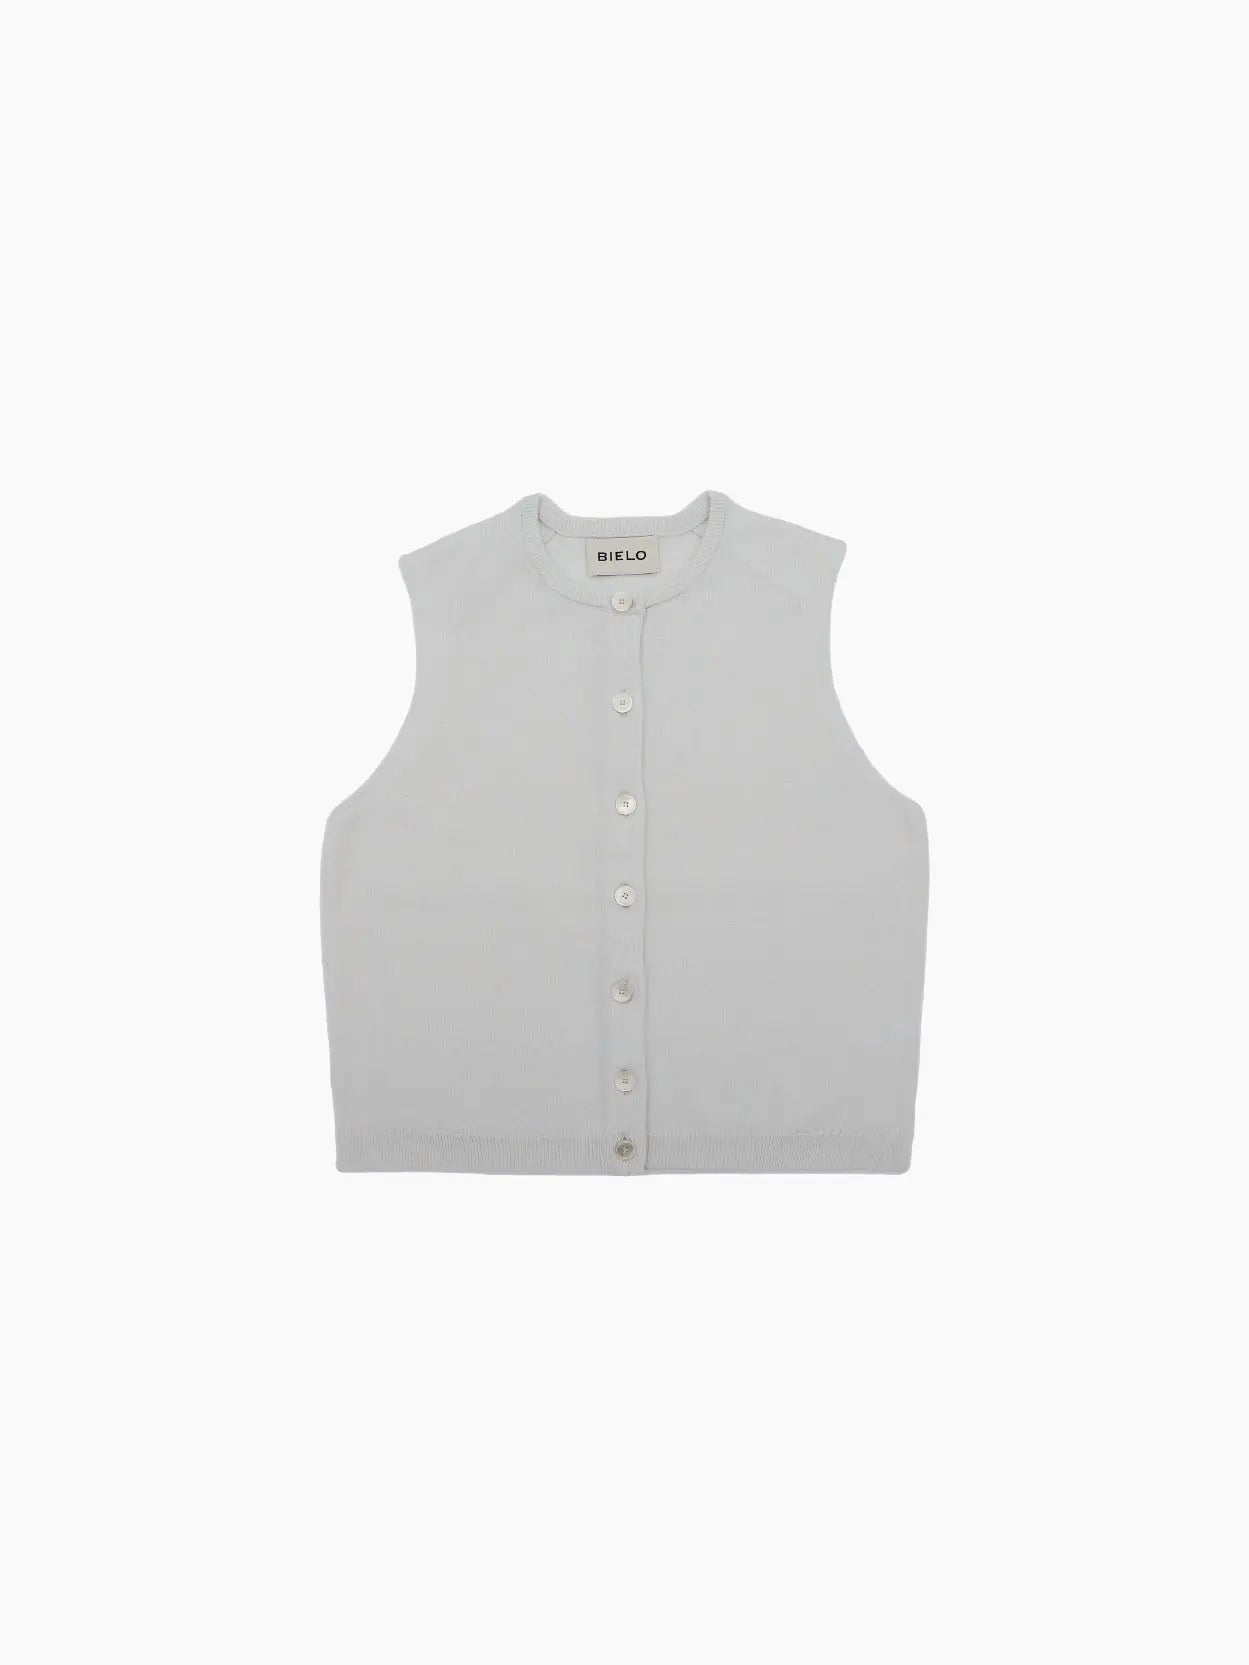 A light gray, sleeveless, button-up knit vest is shown against a white background. The vest has a round neckline and features a series of buttons down the front. The label inside the collar reads "Bielo," exclusively available at Bassalstore in Barcelona.